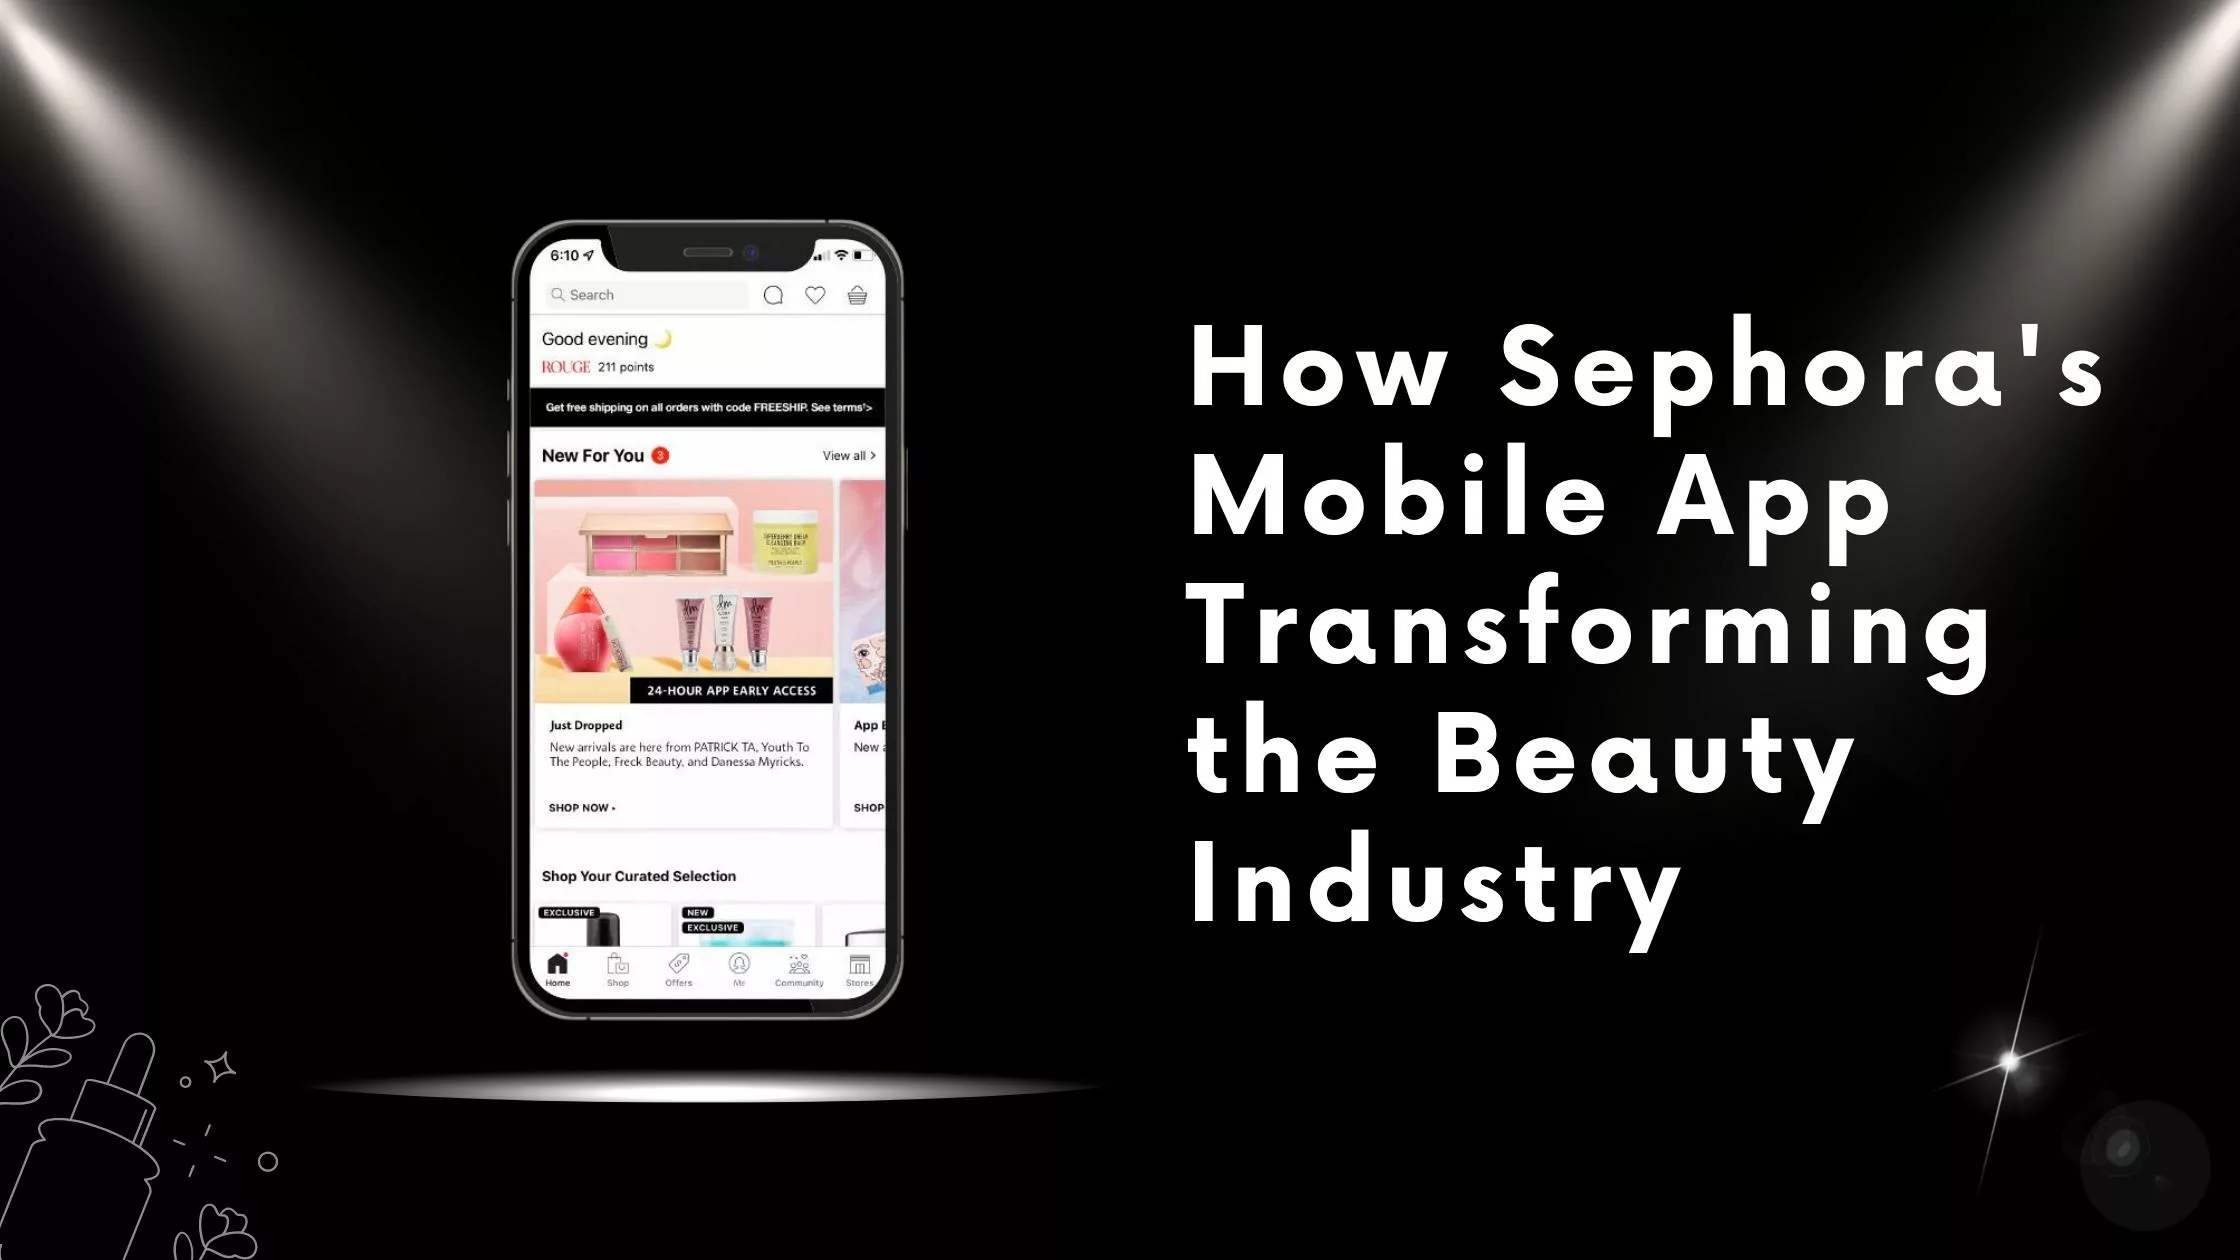 How Sephora's Mobile App Transforming the Beauty Industry